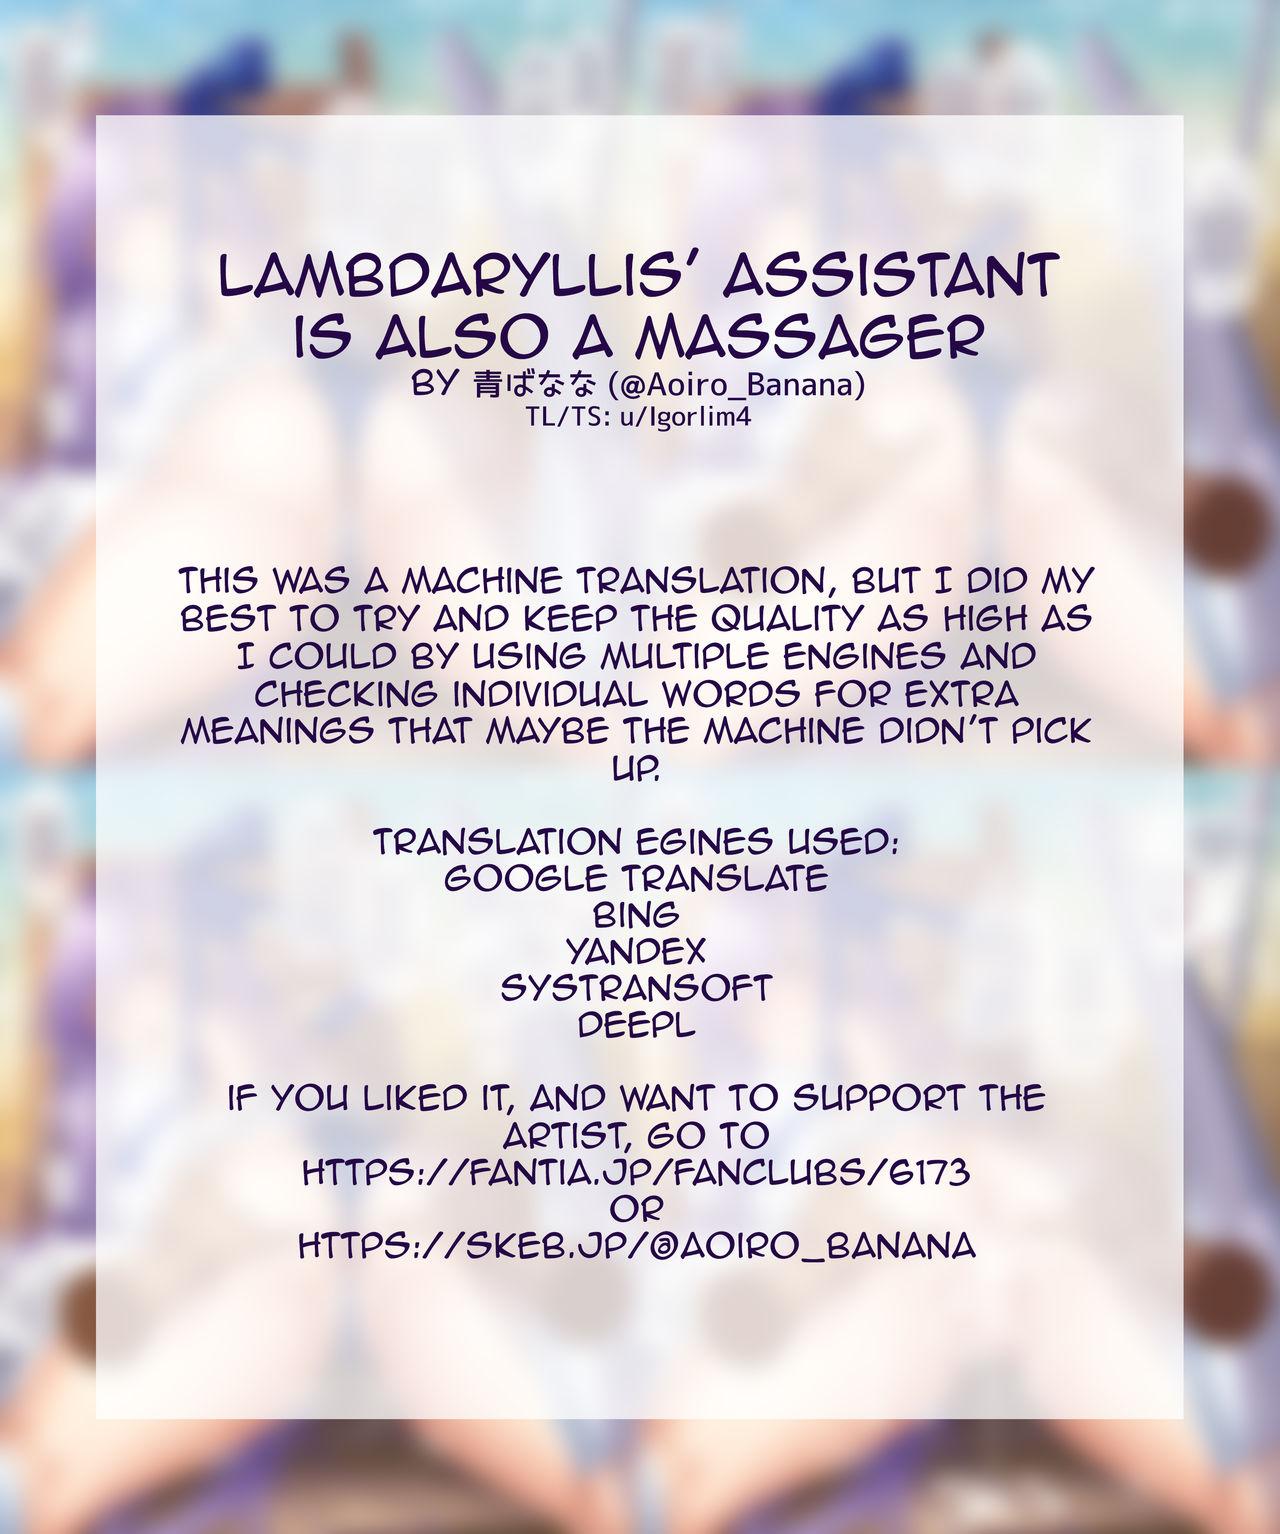 Lambdaryllis' Assistant is also a masseur 5